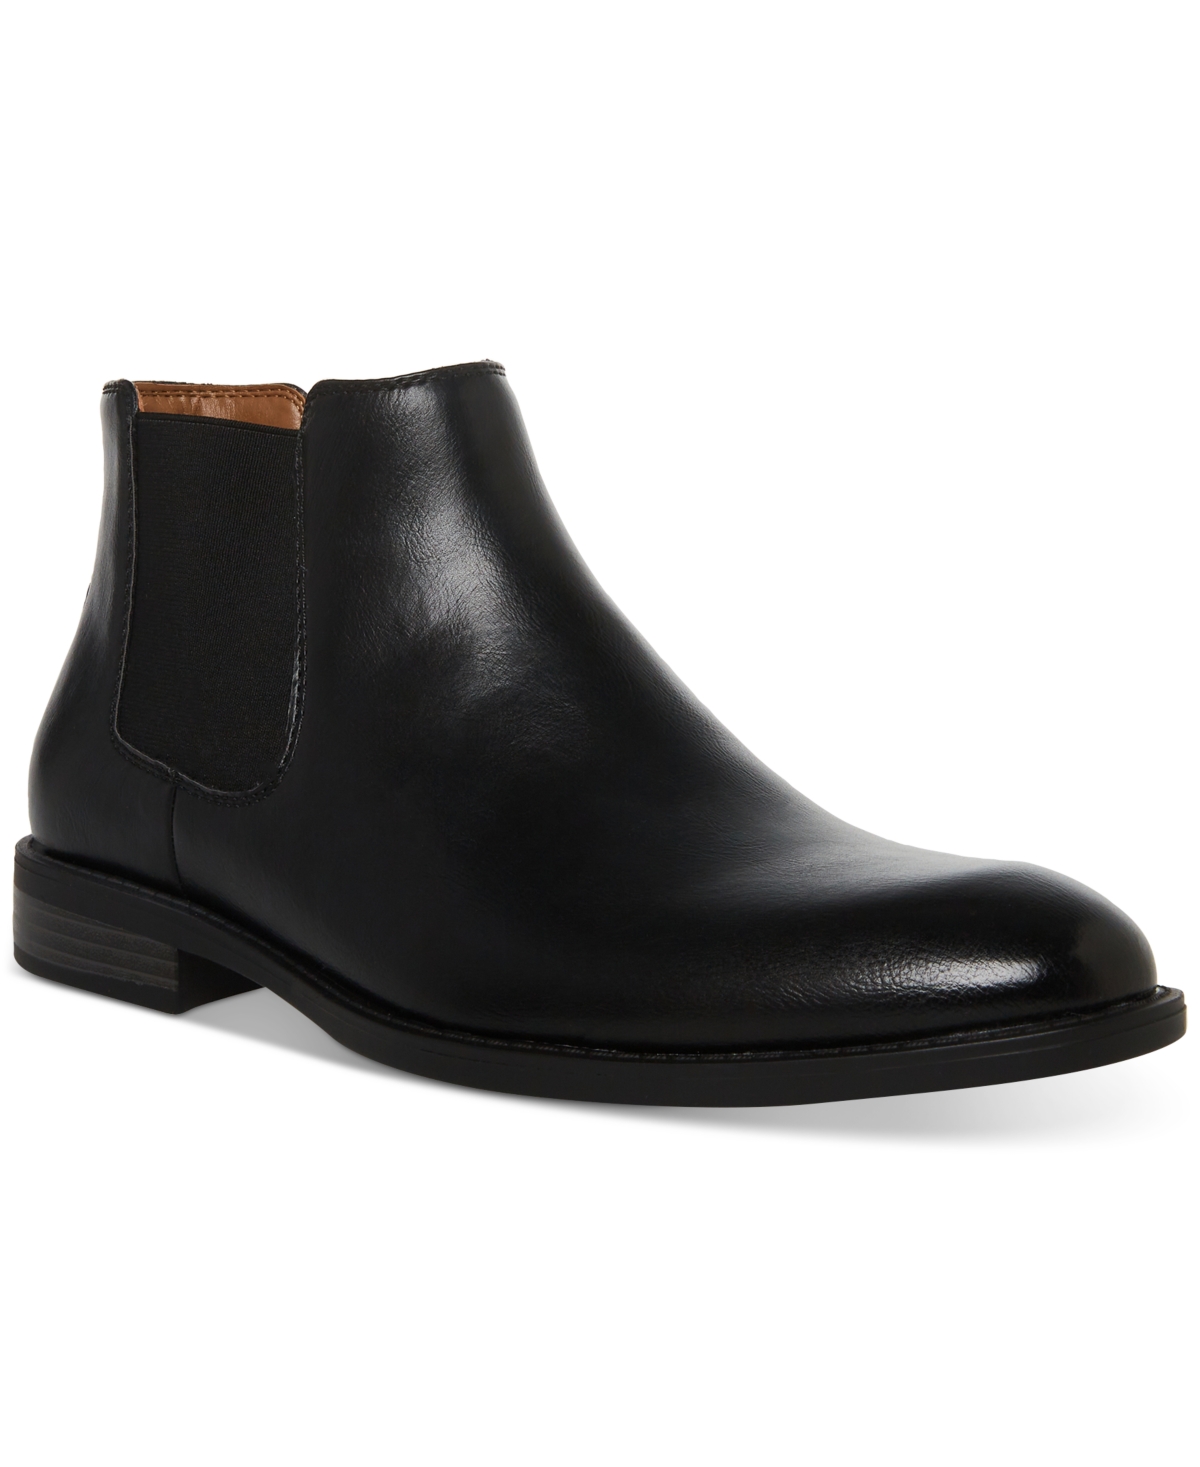 1940s Men’s Shoes & Boots | Gangster, Spectator, Black and White Shoes Madden Men Mens Maxxin Mid Height Chelsea Boot - Black $32.99 AT vintagedancer.com